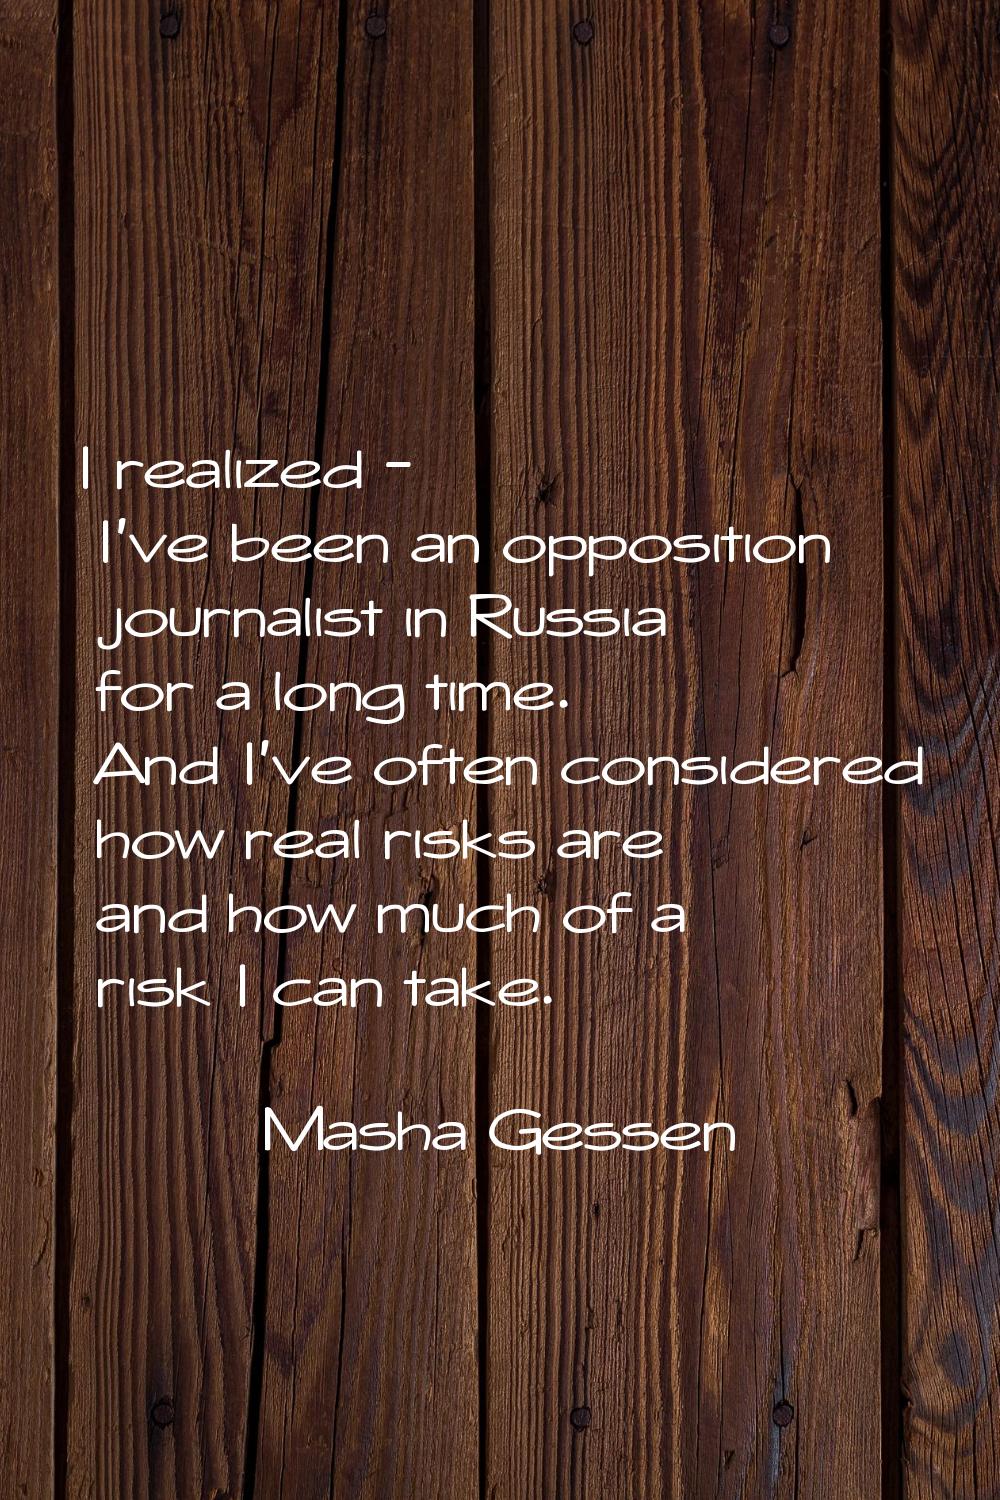 I realized - I've been an opposition journalist in Russia for a long time. And I've often considere